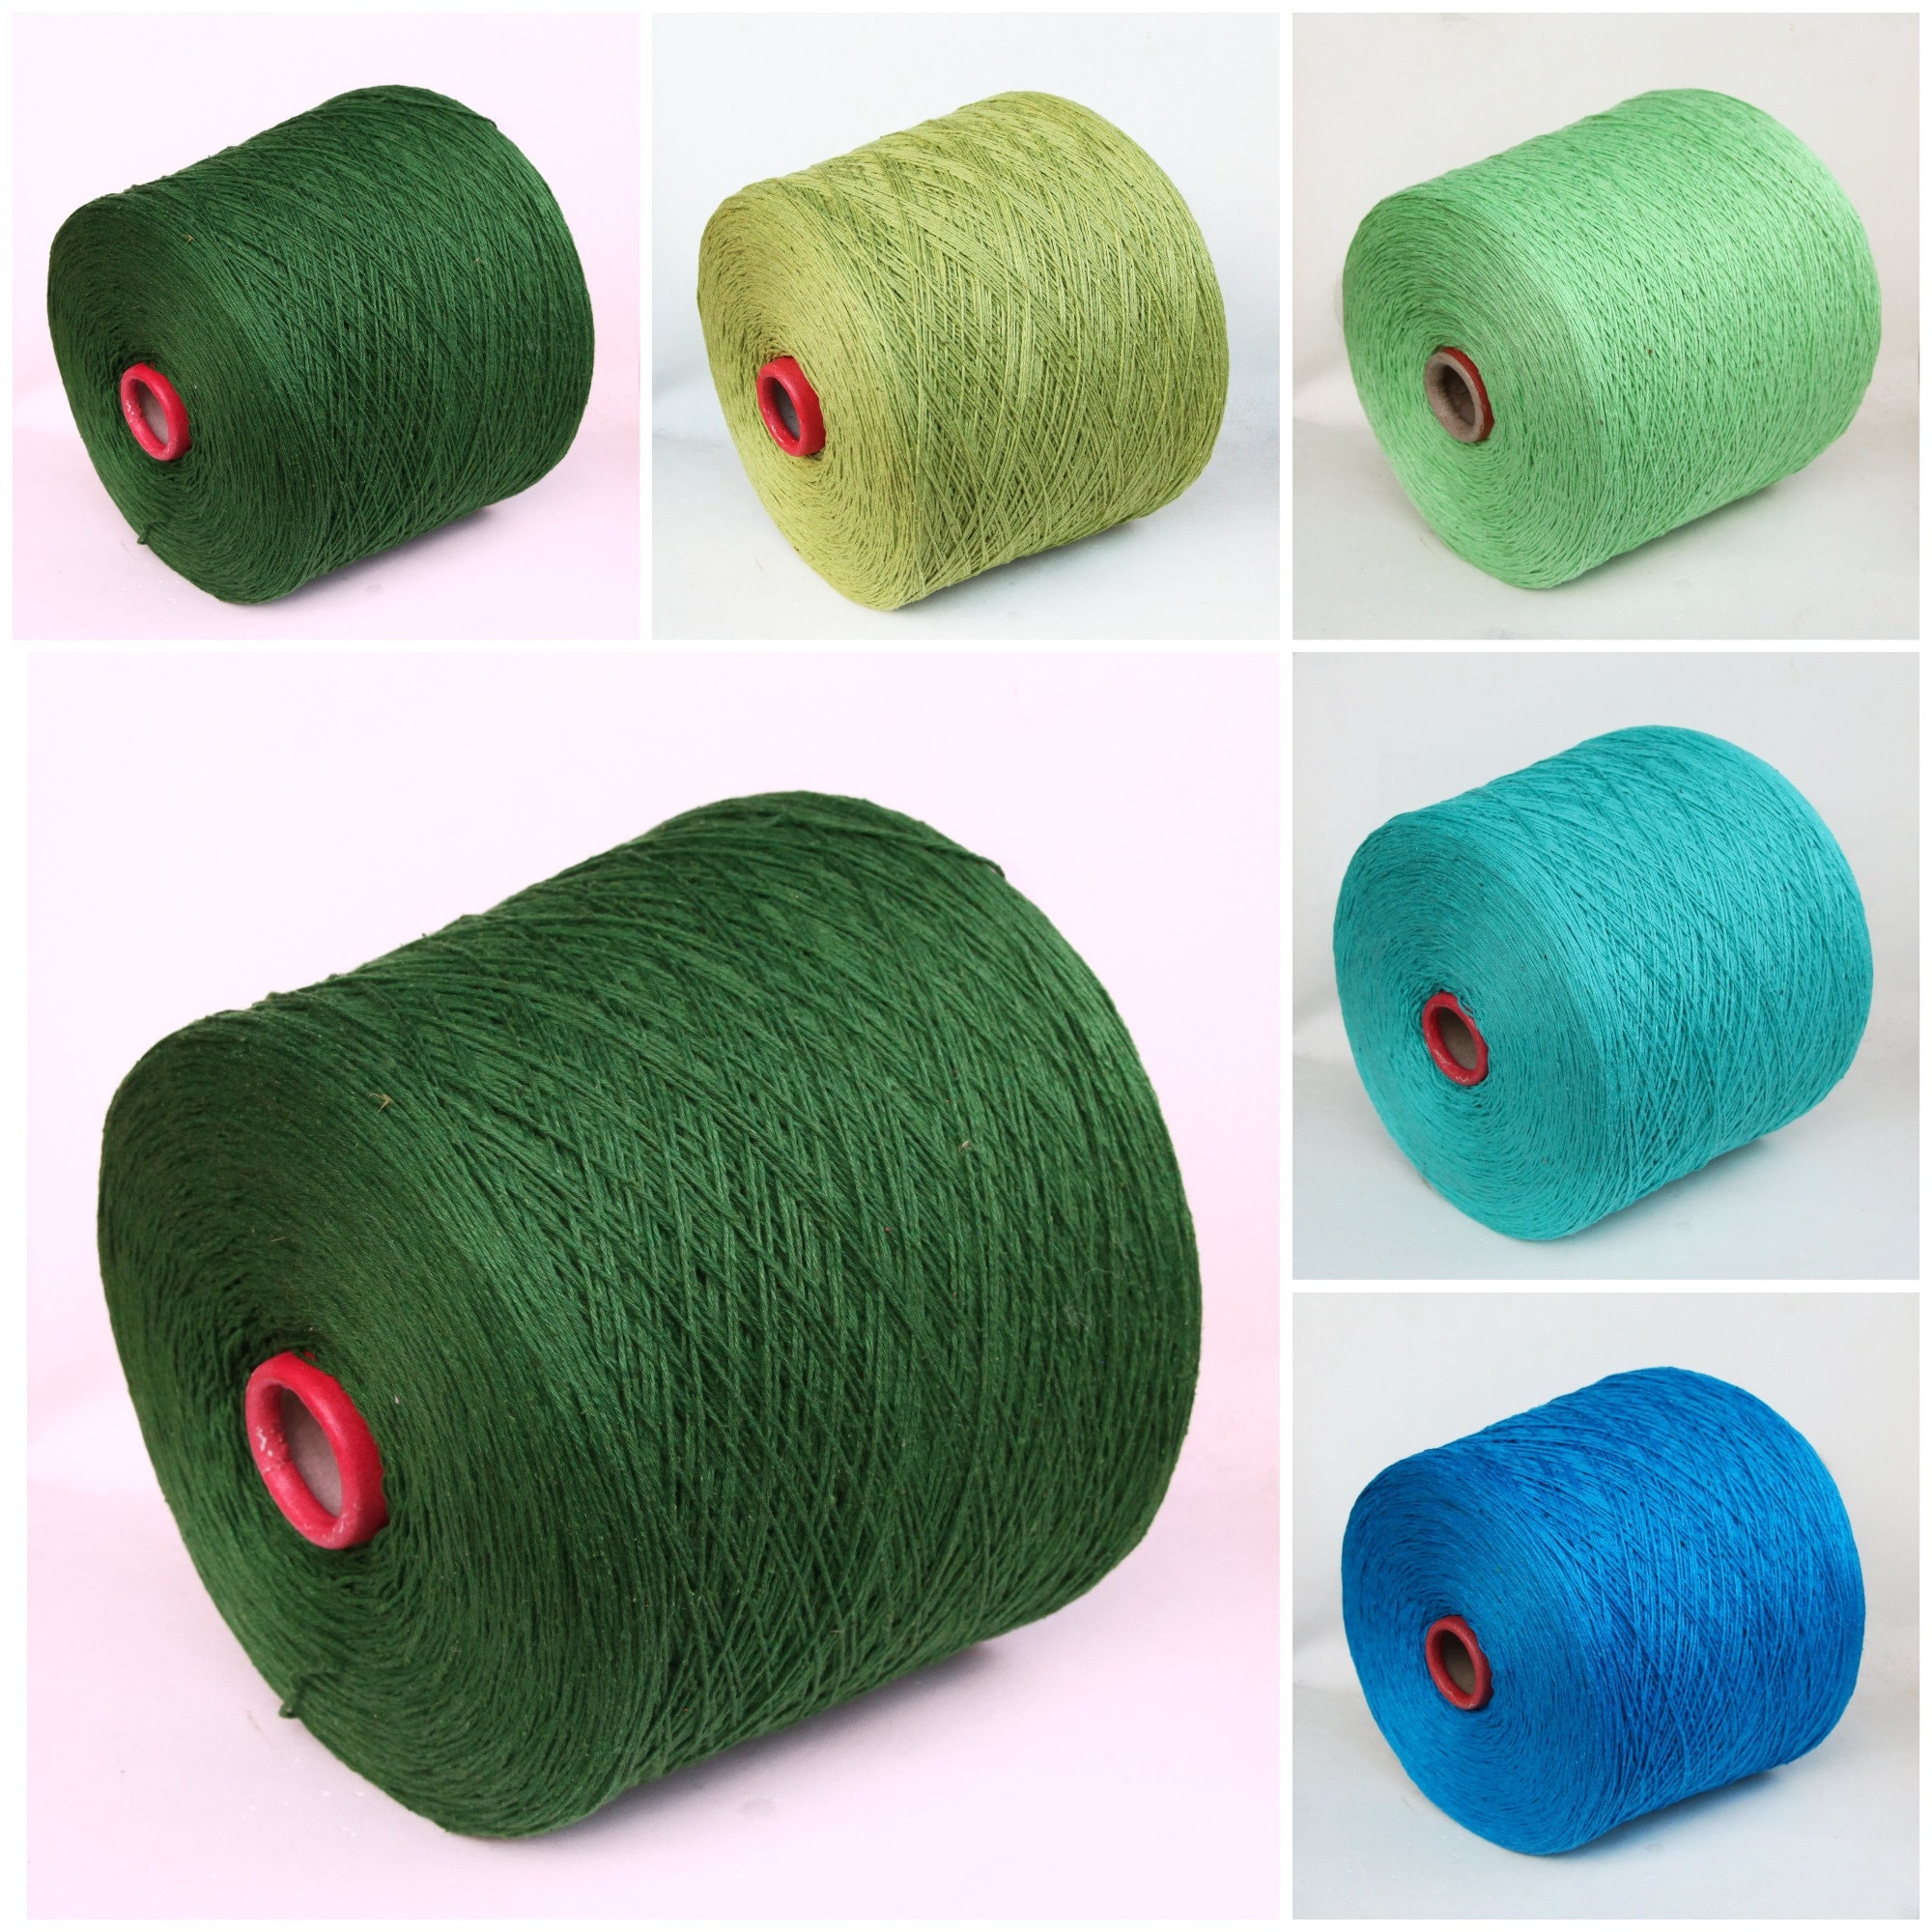 100% noil (bourette) silk yarn on cone, lace weight yarn for knitting,  weaving and crochet, per 100g